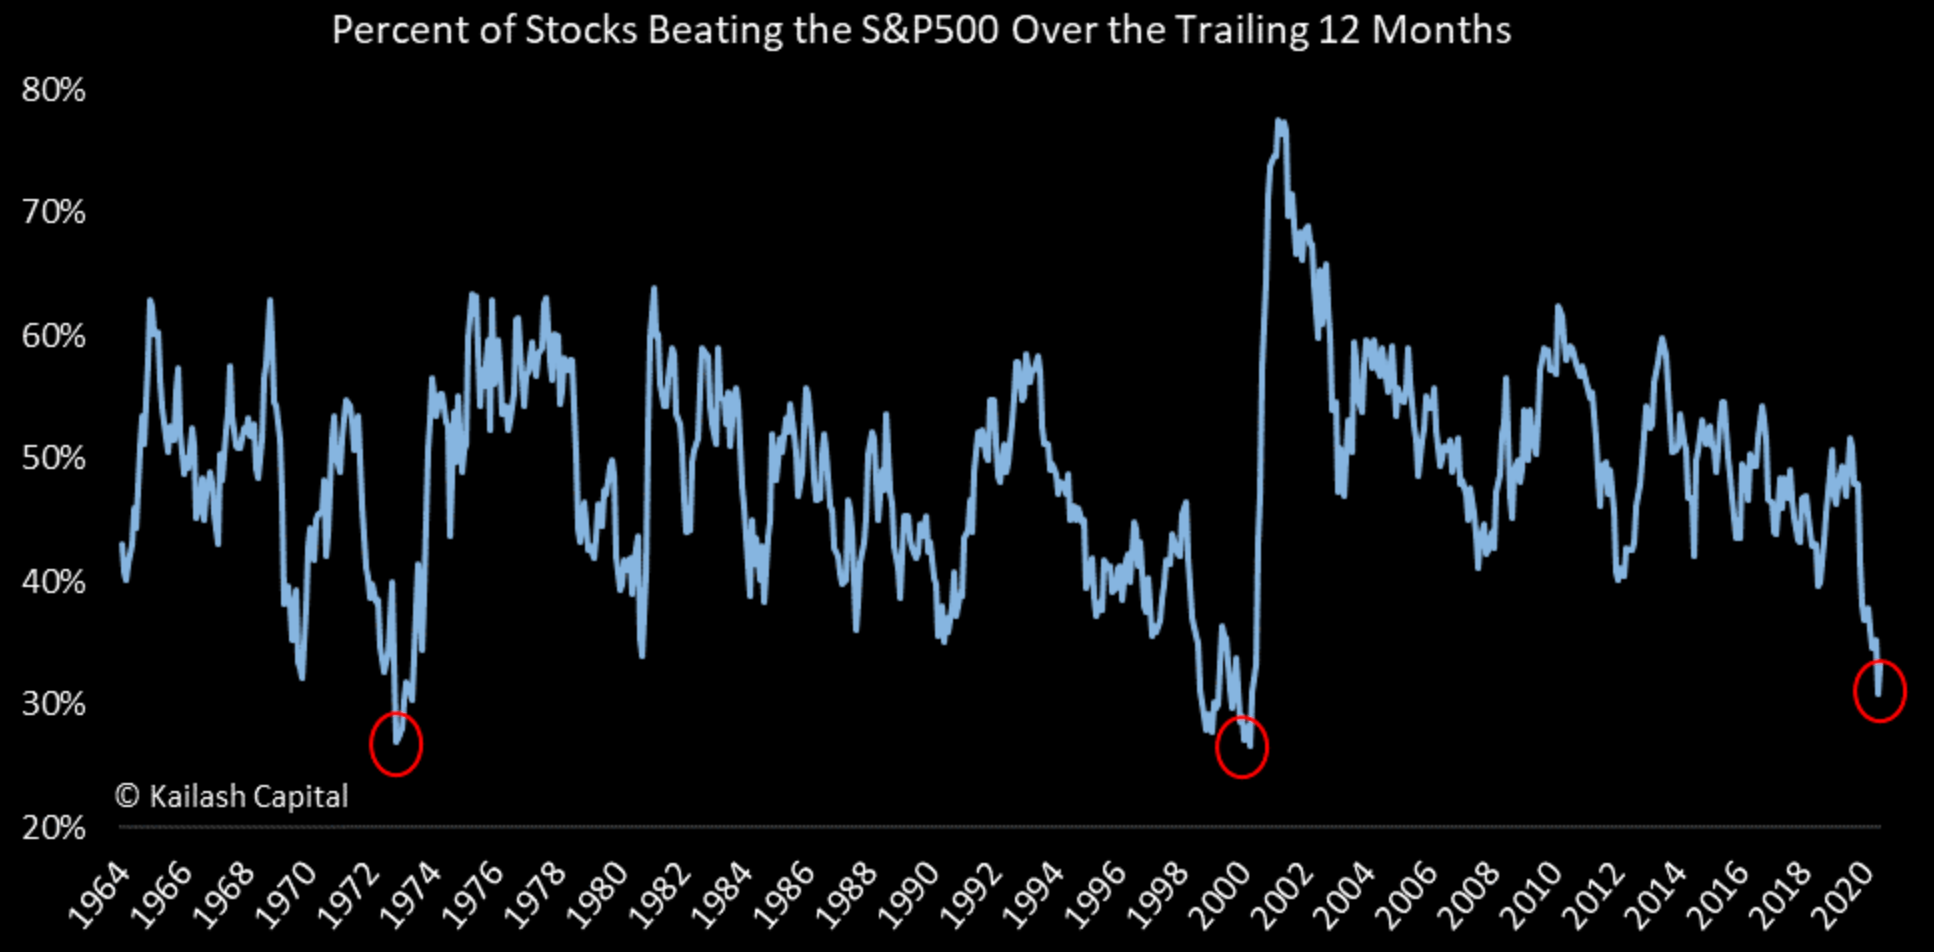 % of stocks beating the S&P 500 over the trailing 12 months  